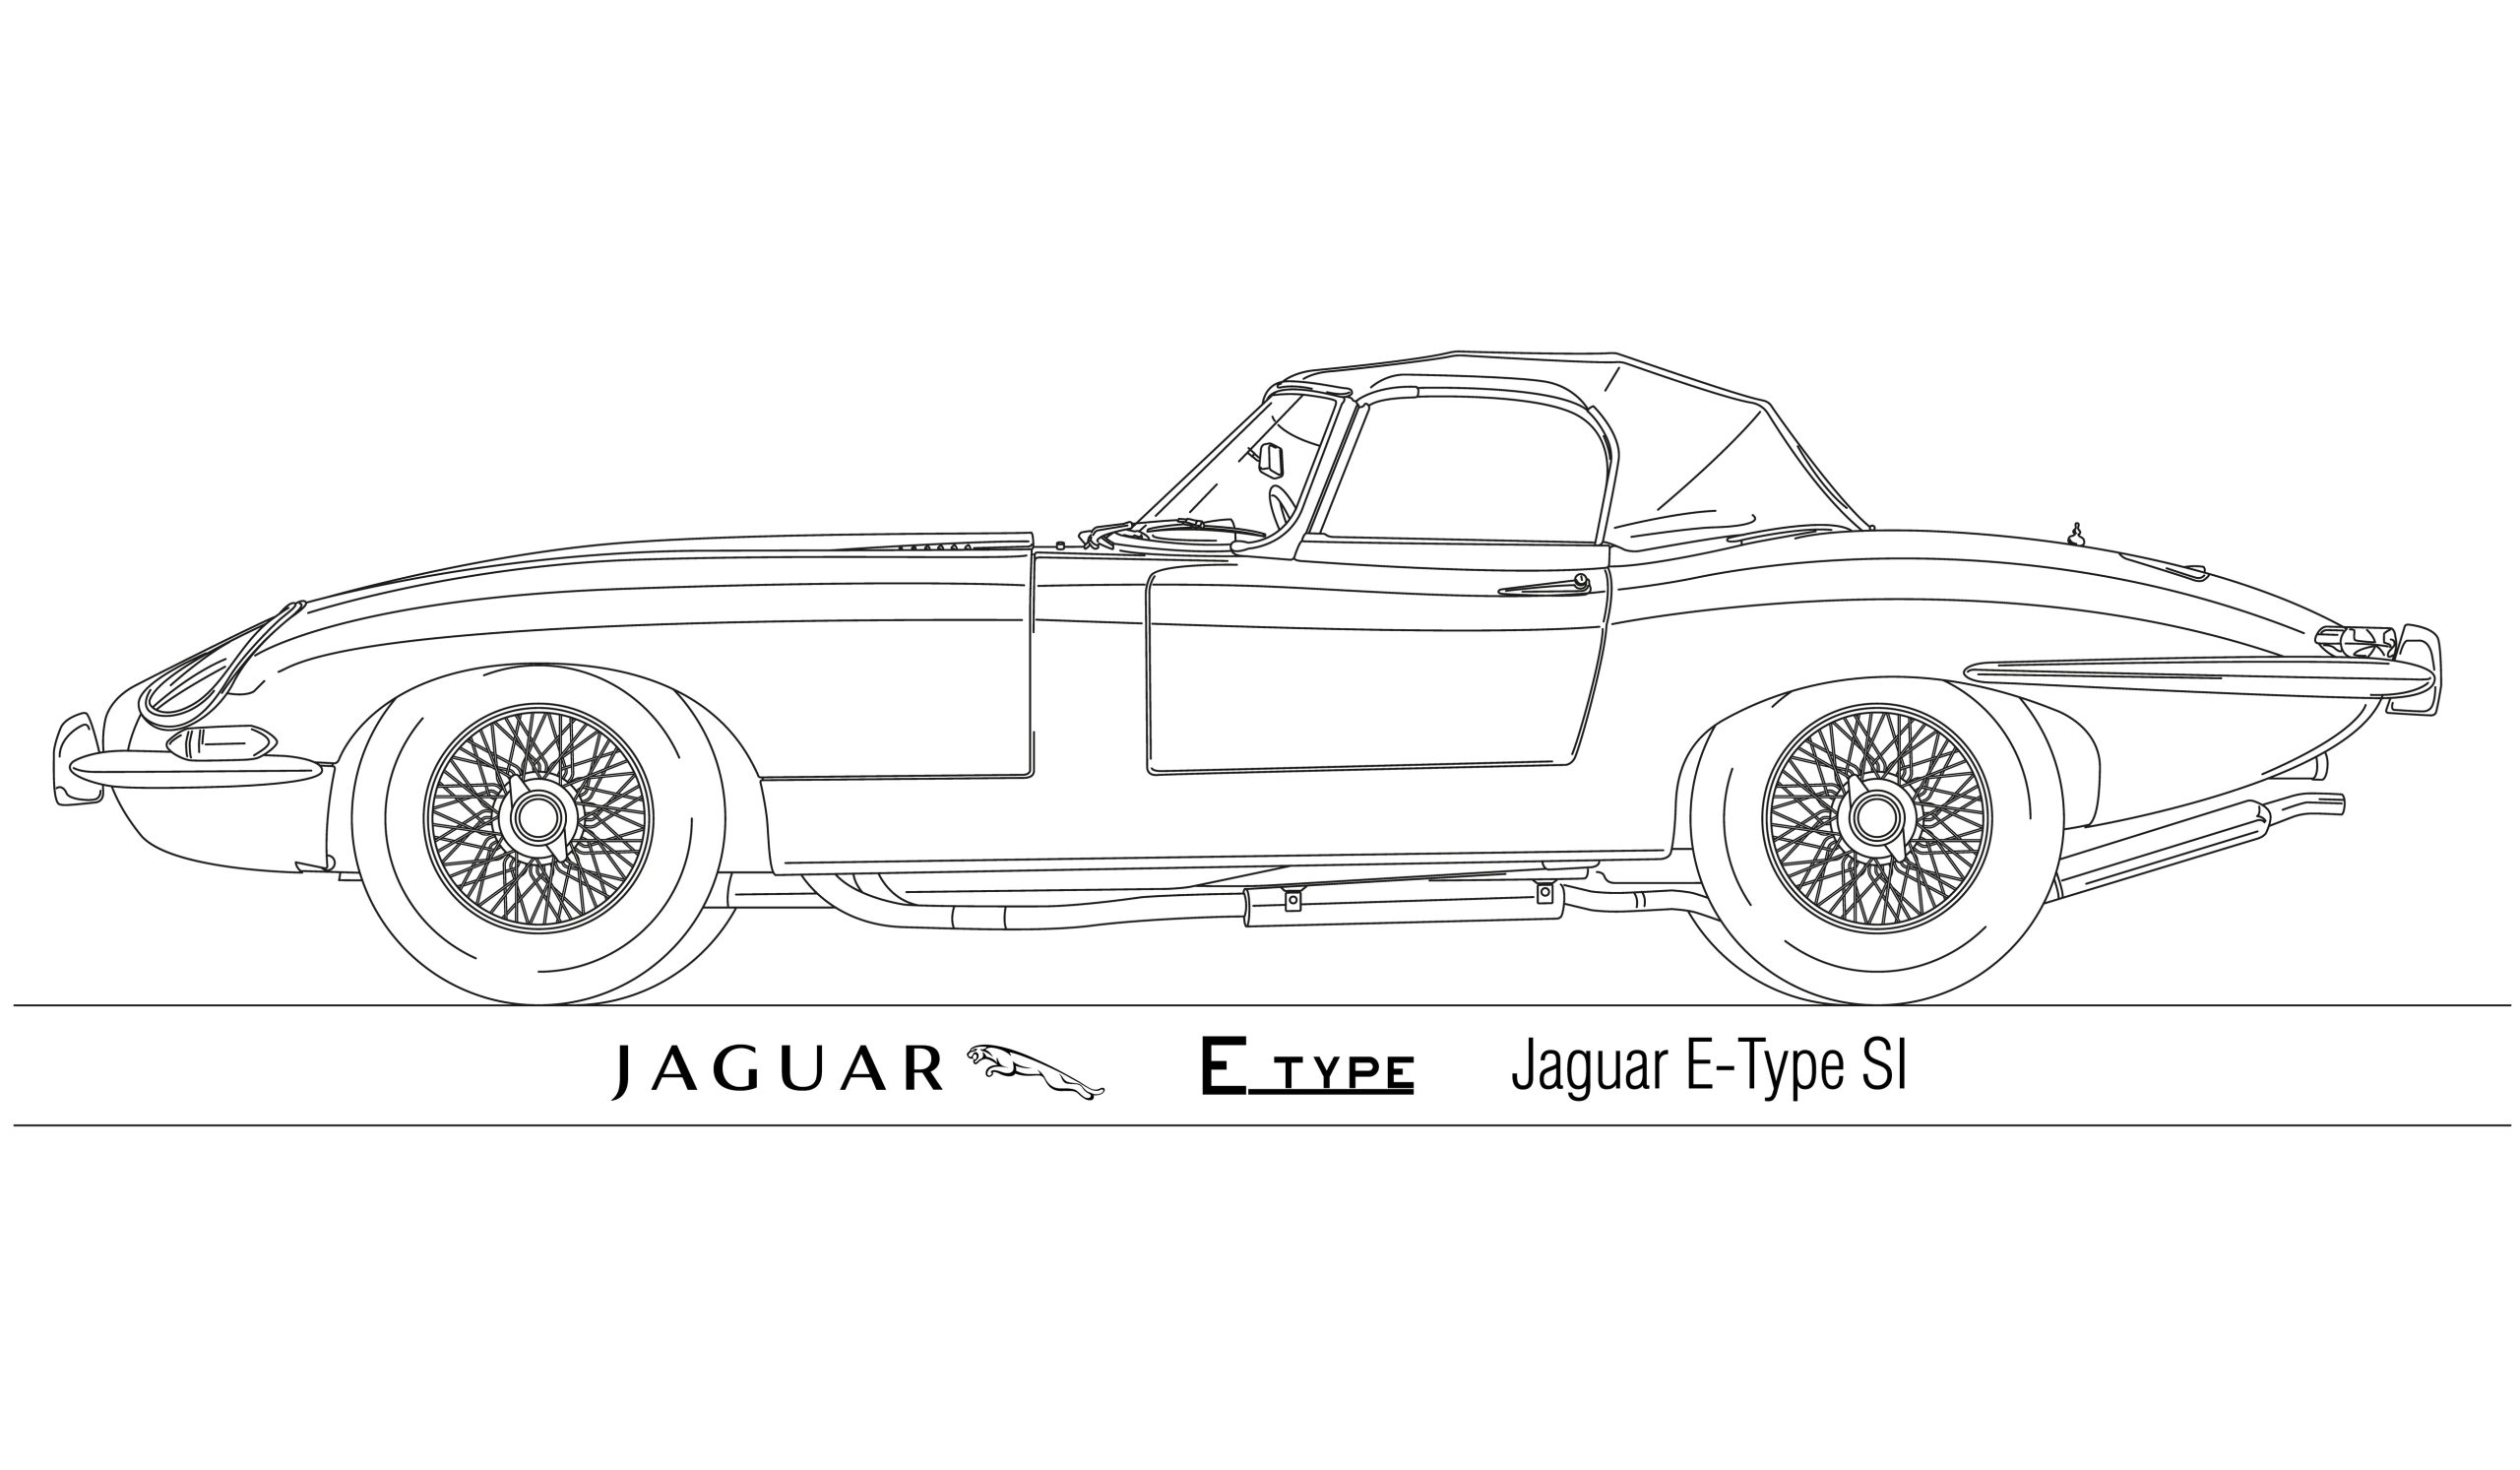 Jaguar E Type SI Spider vintage and classic car, outlined on the